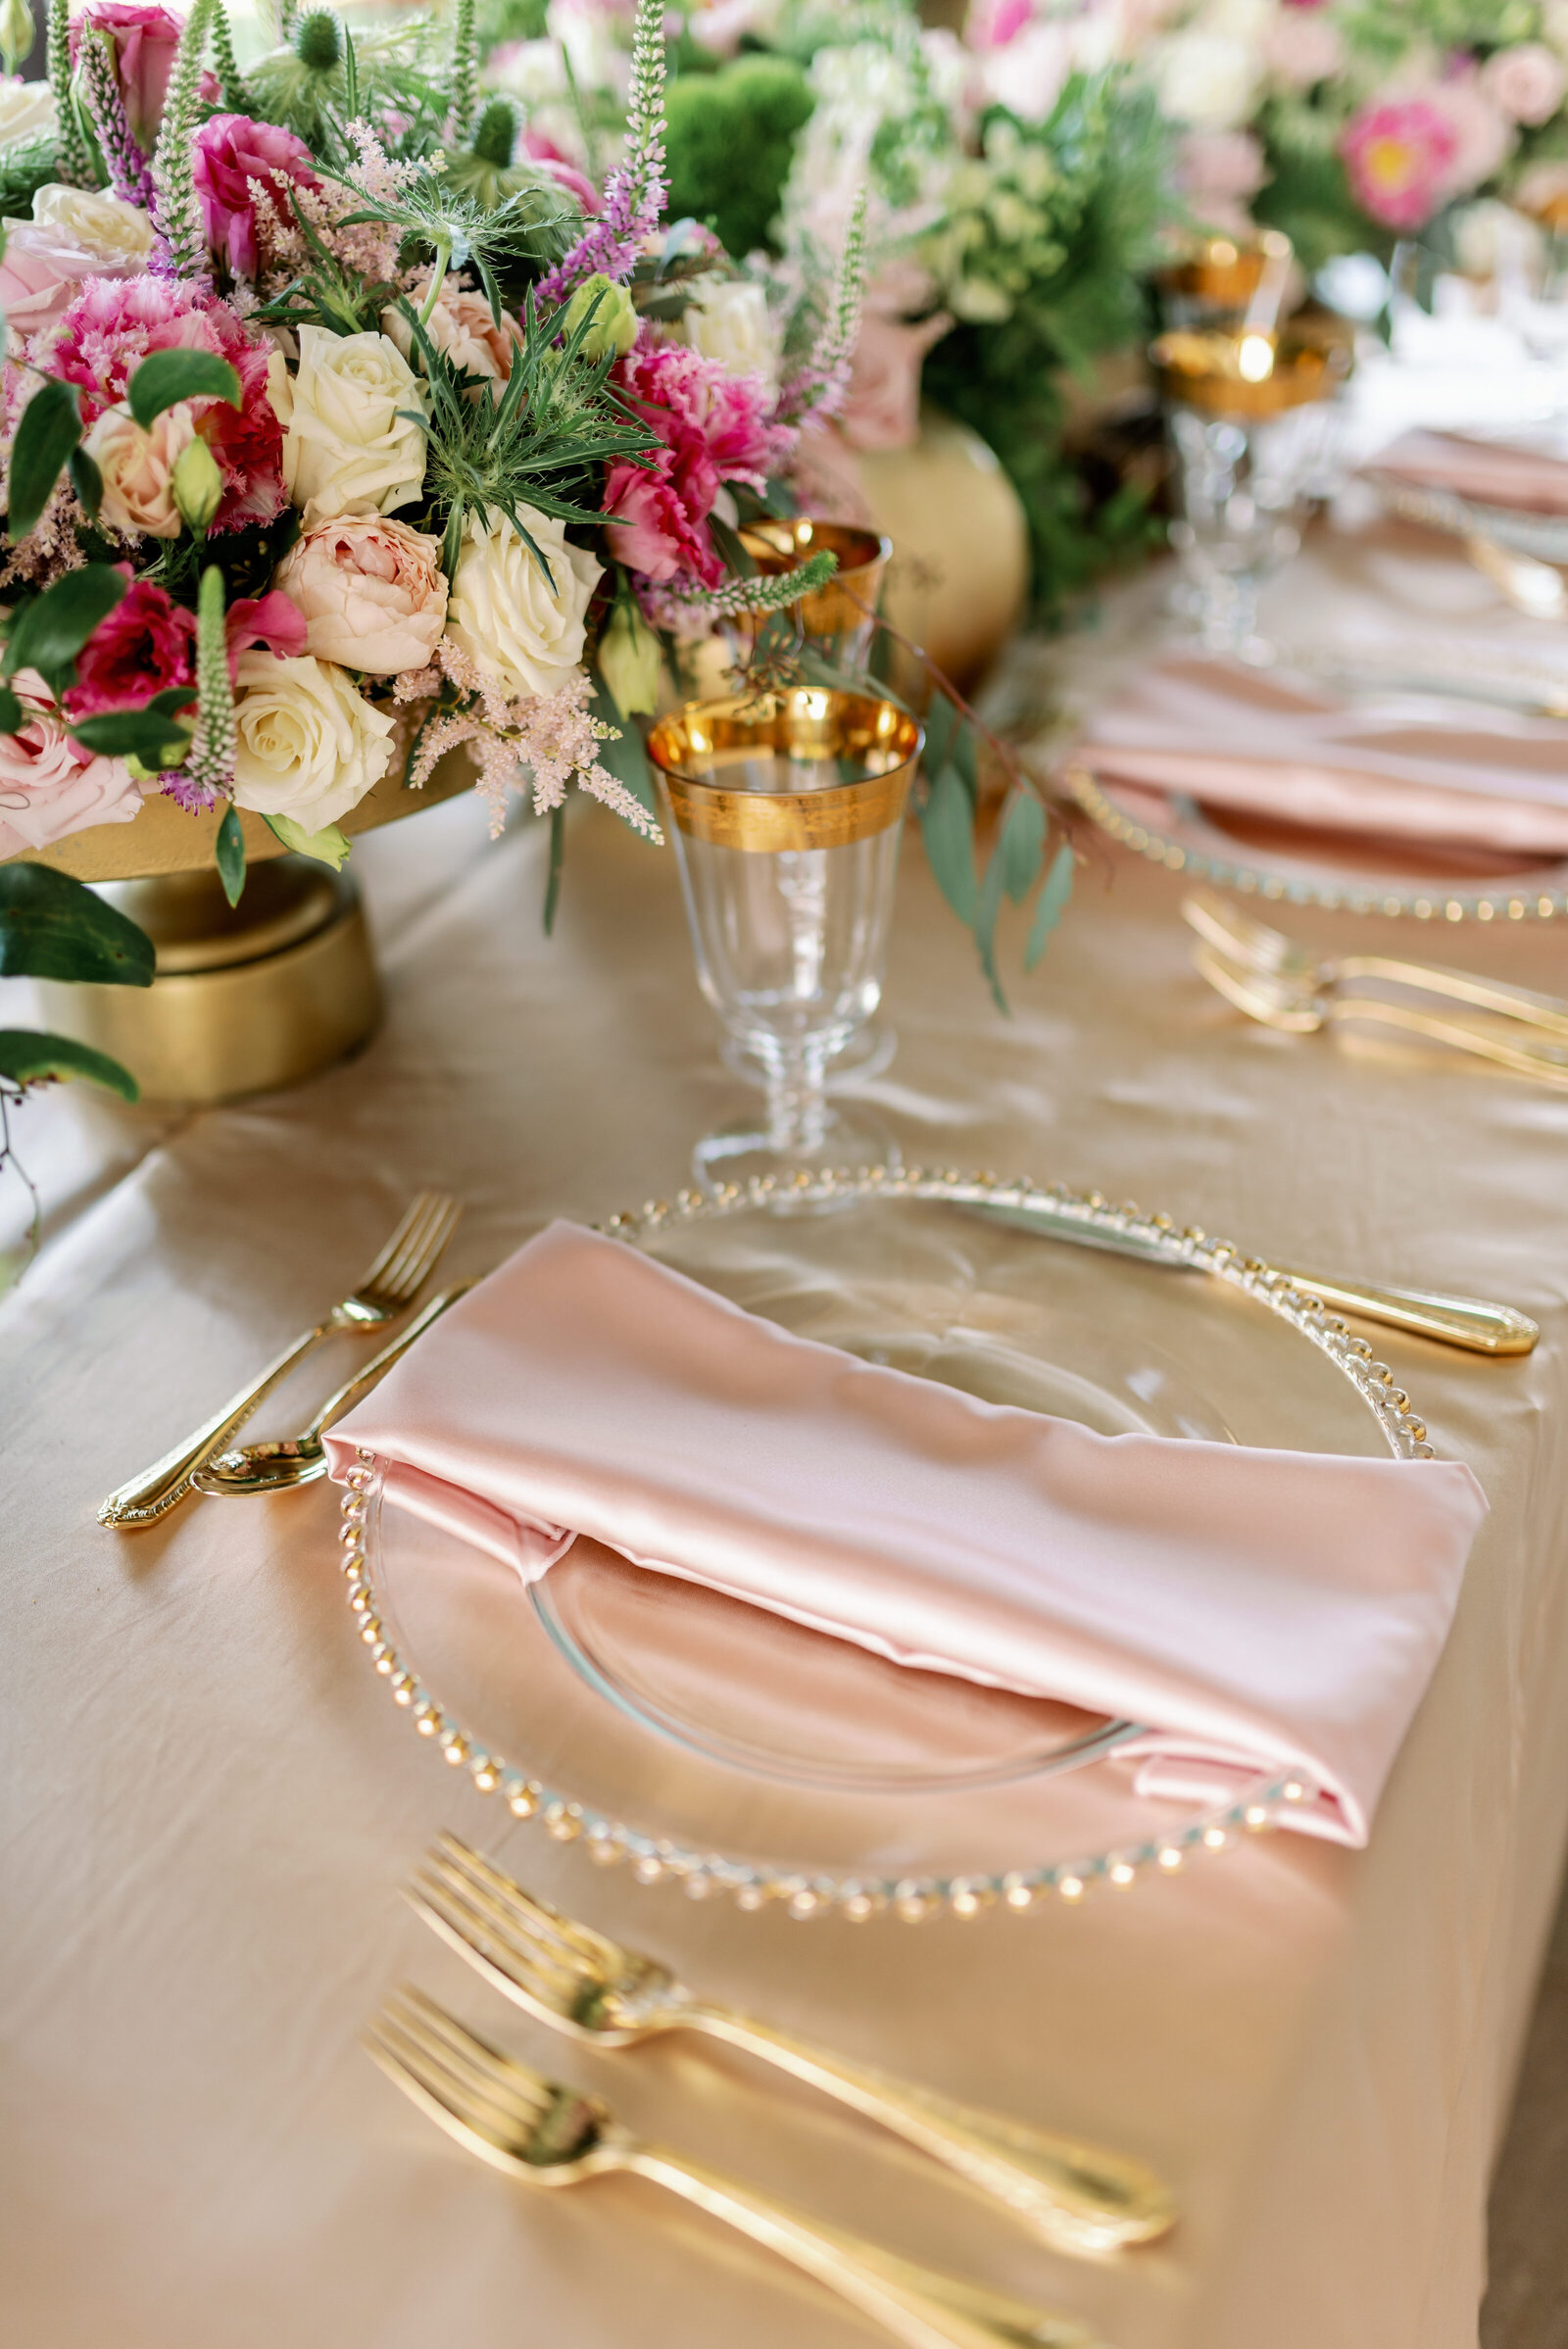 detail of dinner plate with pink silk napkin and gold flatware. A crystal stemmed glass with golden rim sits just above the clear charger plate to the right and a colorful floral arrangement can be seen in the center of the tablescape.